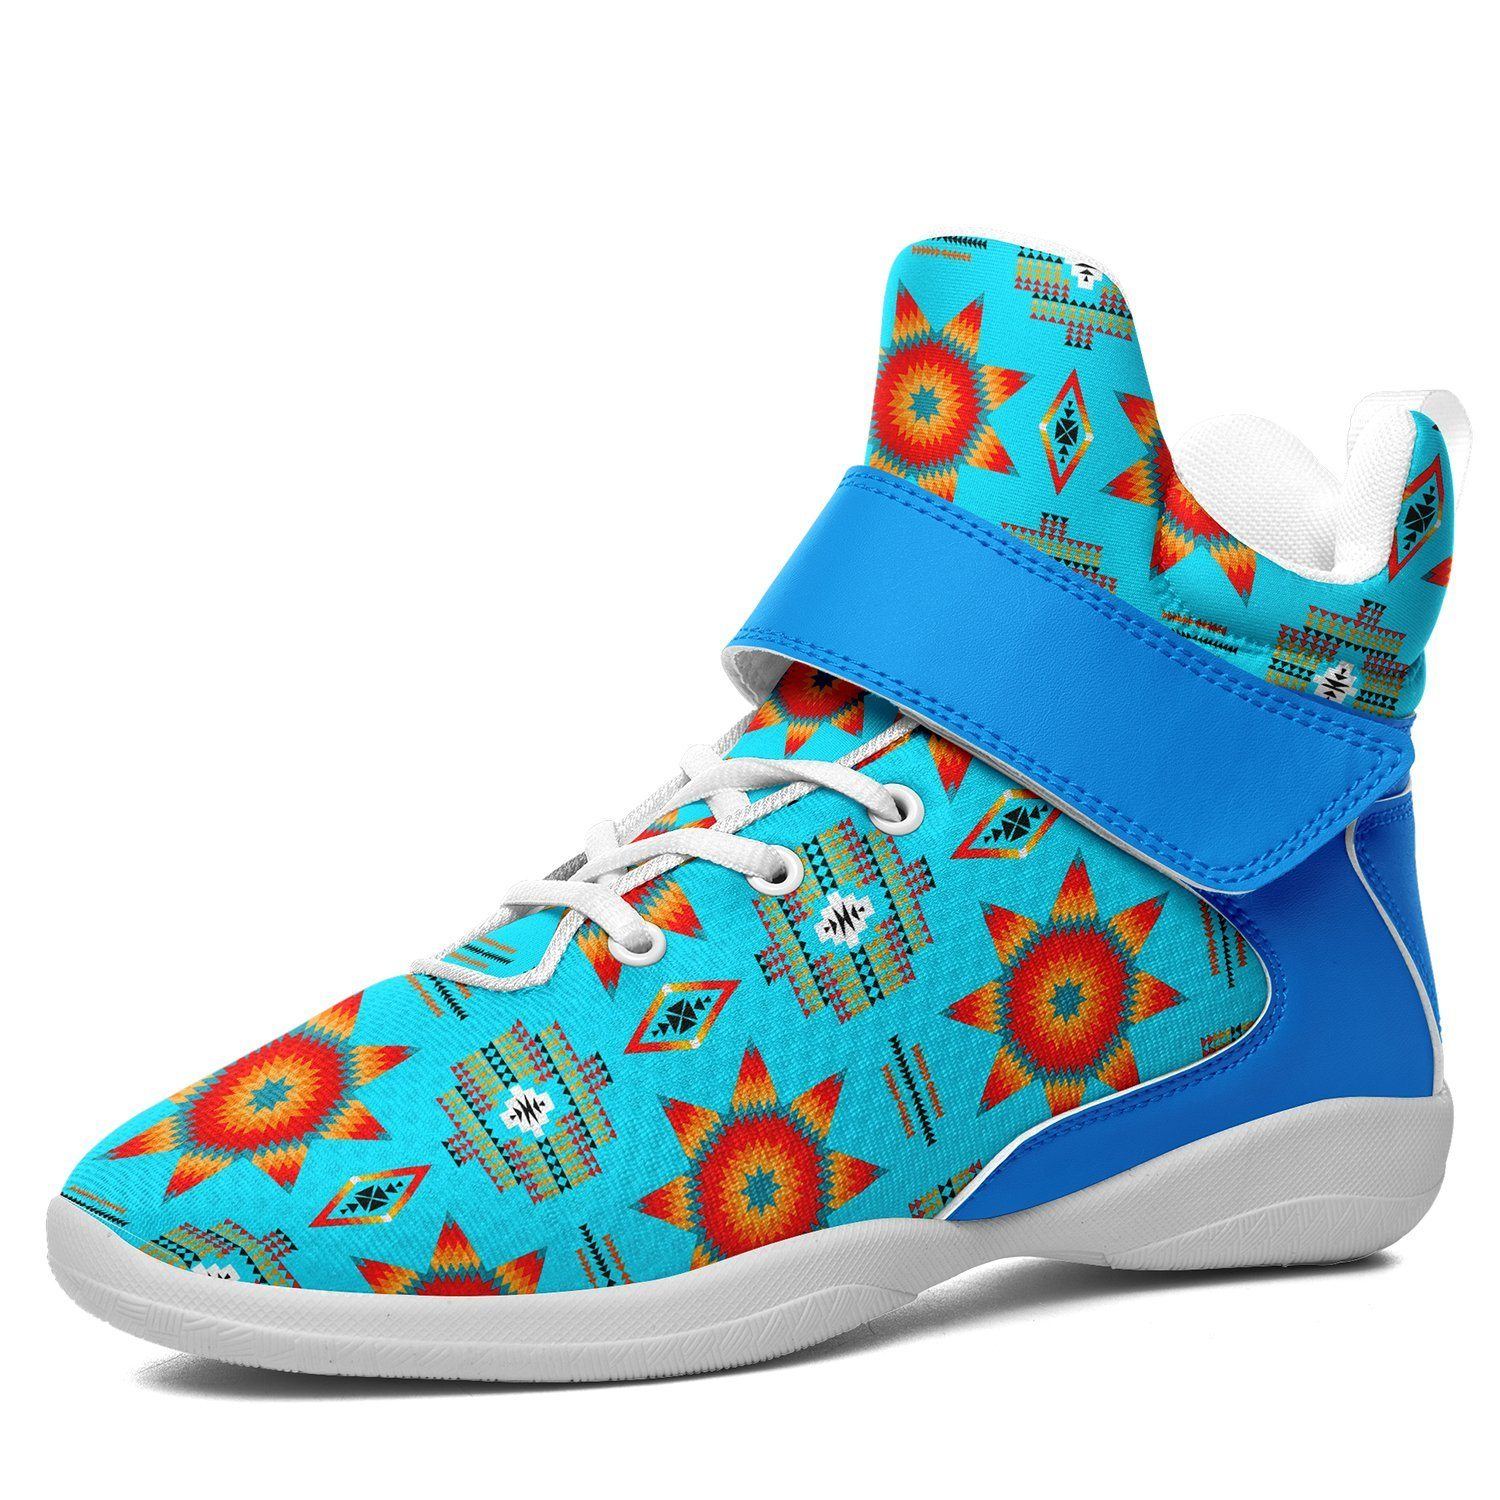 Rising Star Harvest Moon Kid's Ipottaa Basketball / Sport High Top Shoes 49 Dzine US Child 12.5 / EUR 30 White Sole with Light Blue Strap 